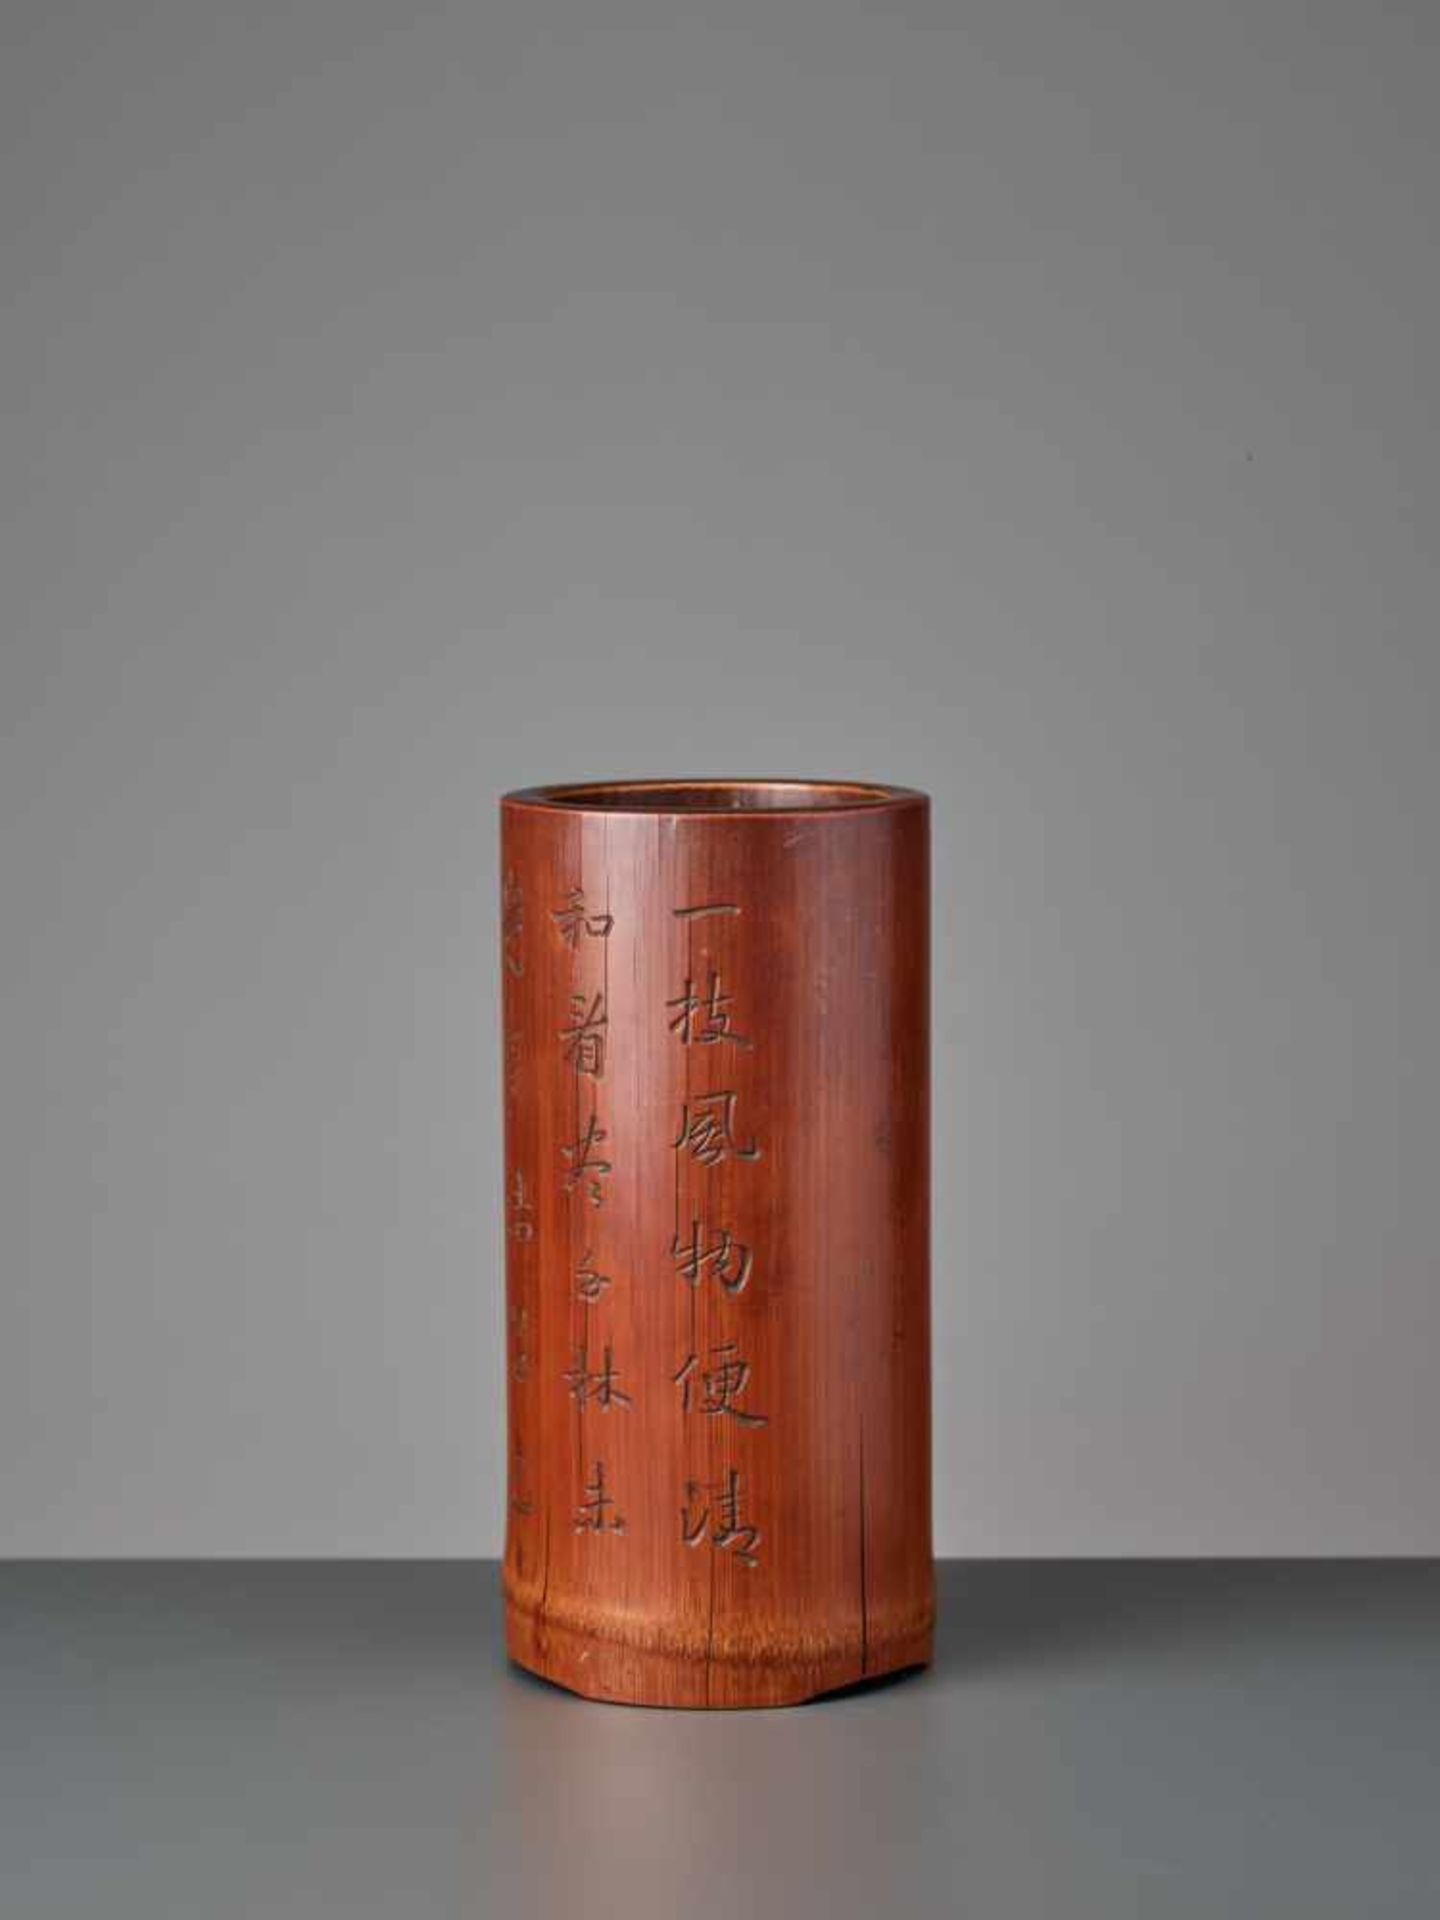 AN INSCRIBED BAMBOO BRUSHPOT WITH A POEM BY SU SHI, QING DYNASTY, 19TH CENTURY Bamboo with good - Image 6 of 9